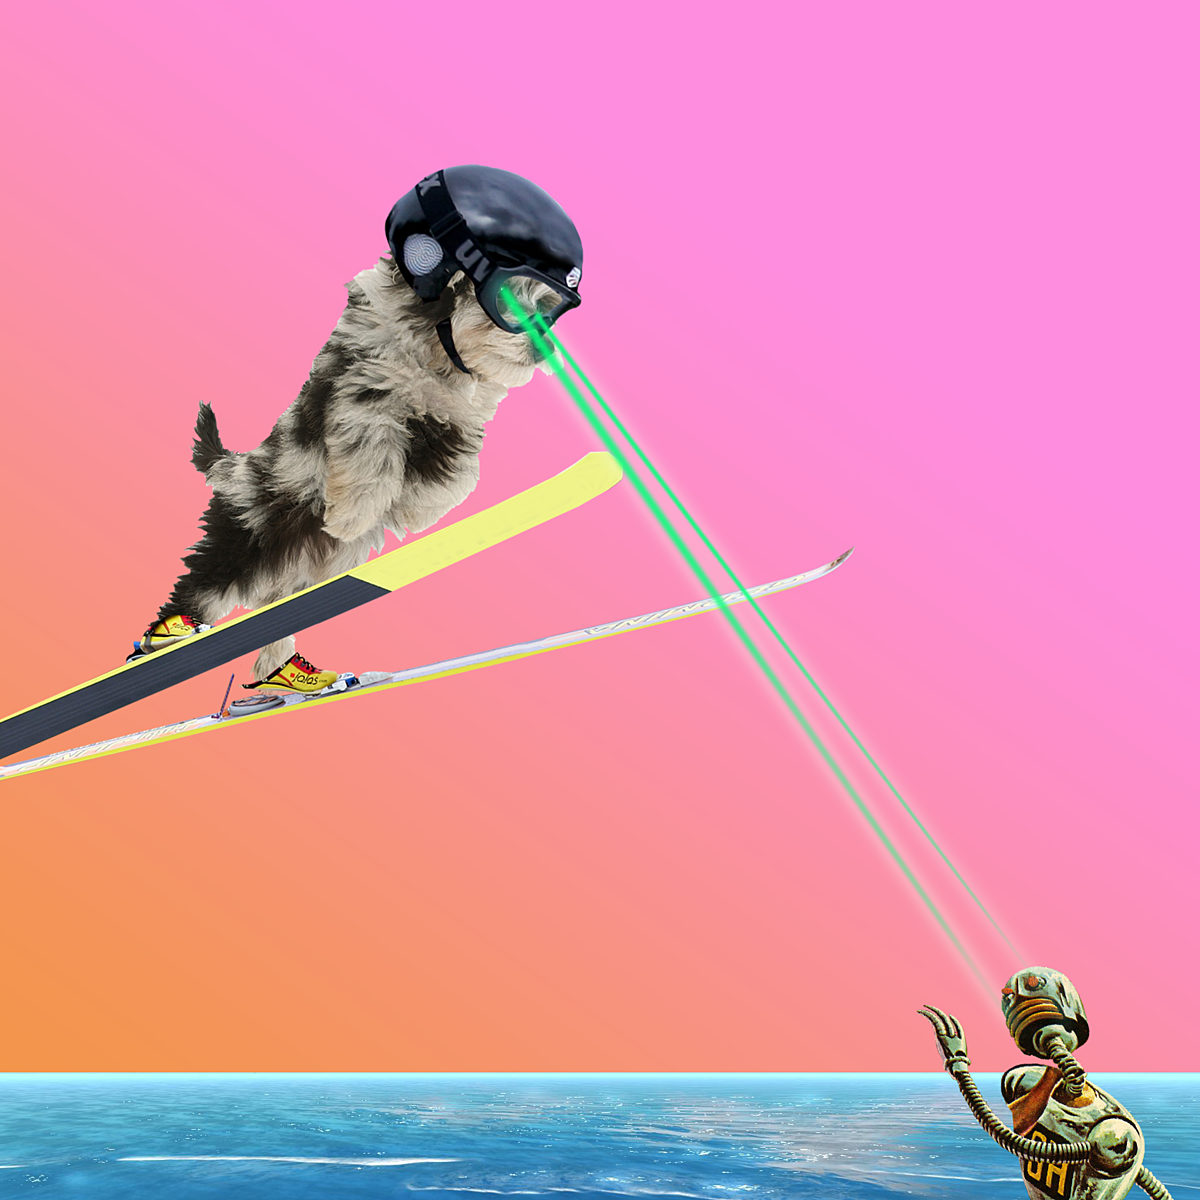 A dog on skis firing laserbeams from its eyes